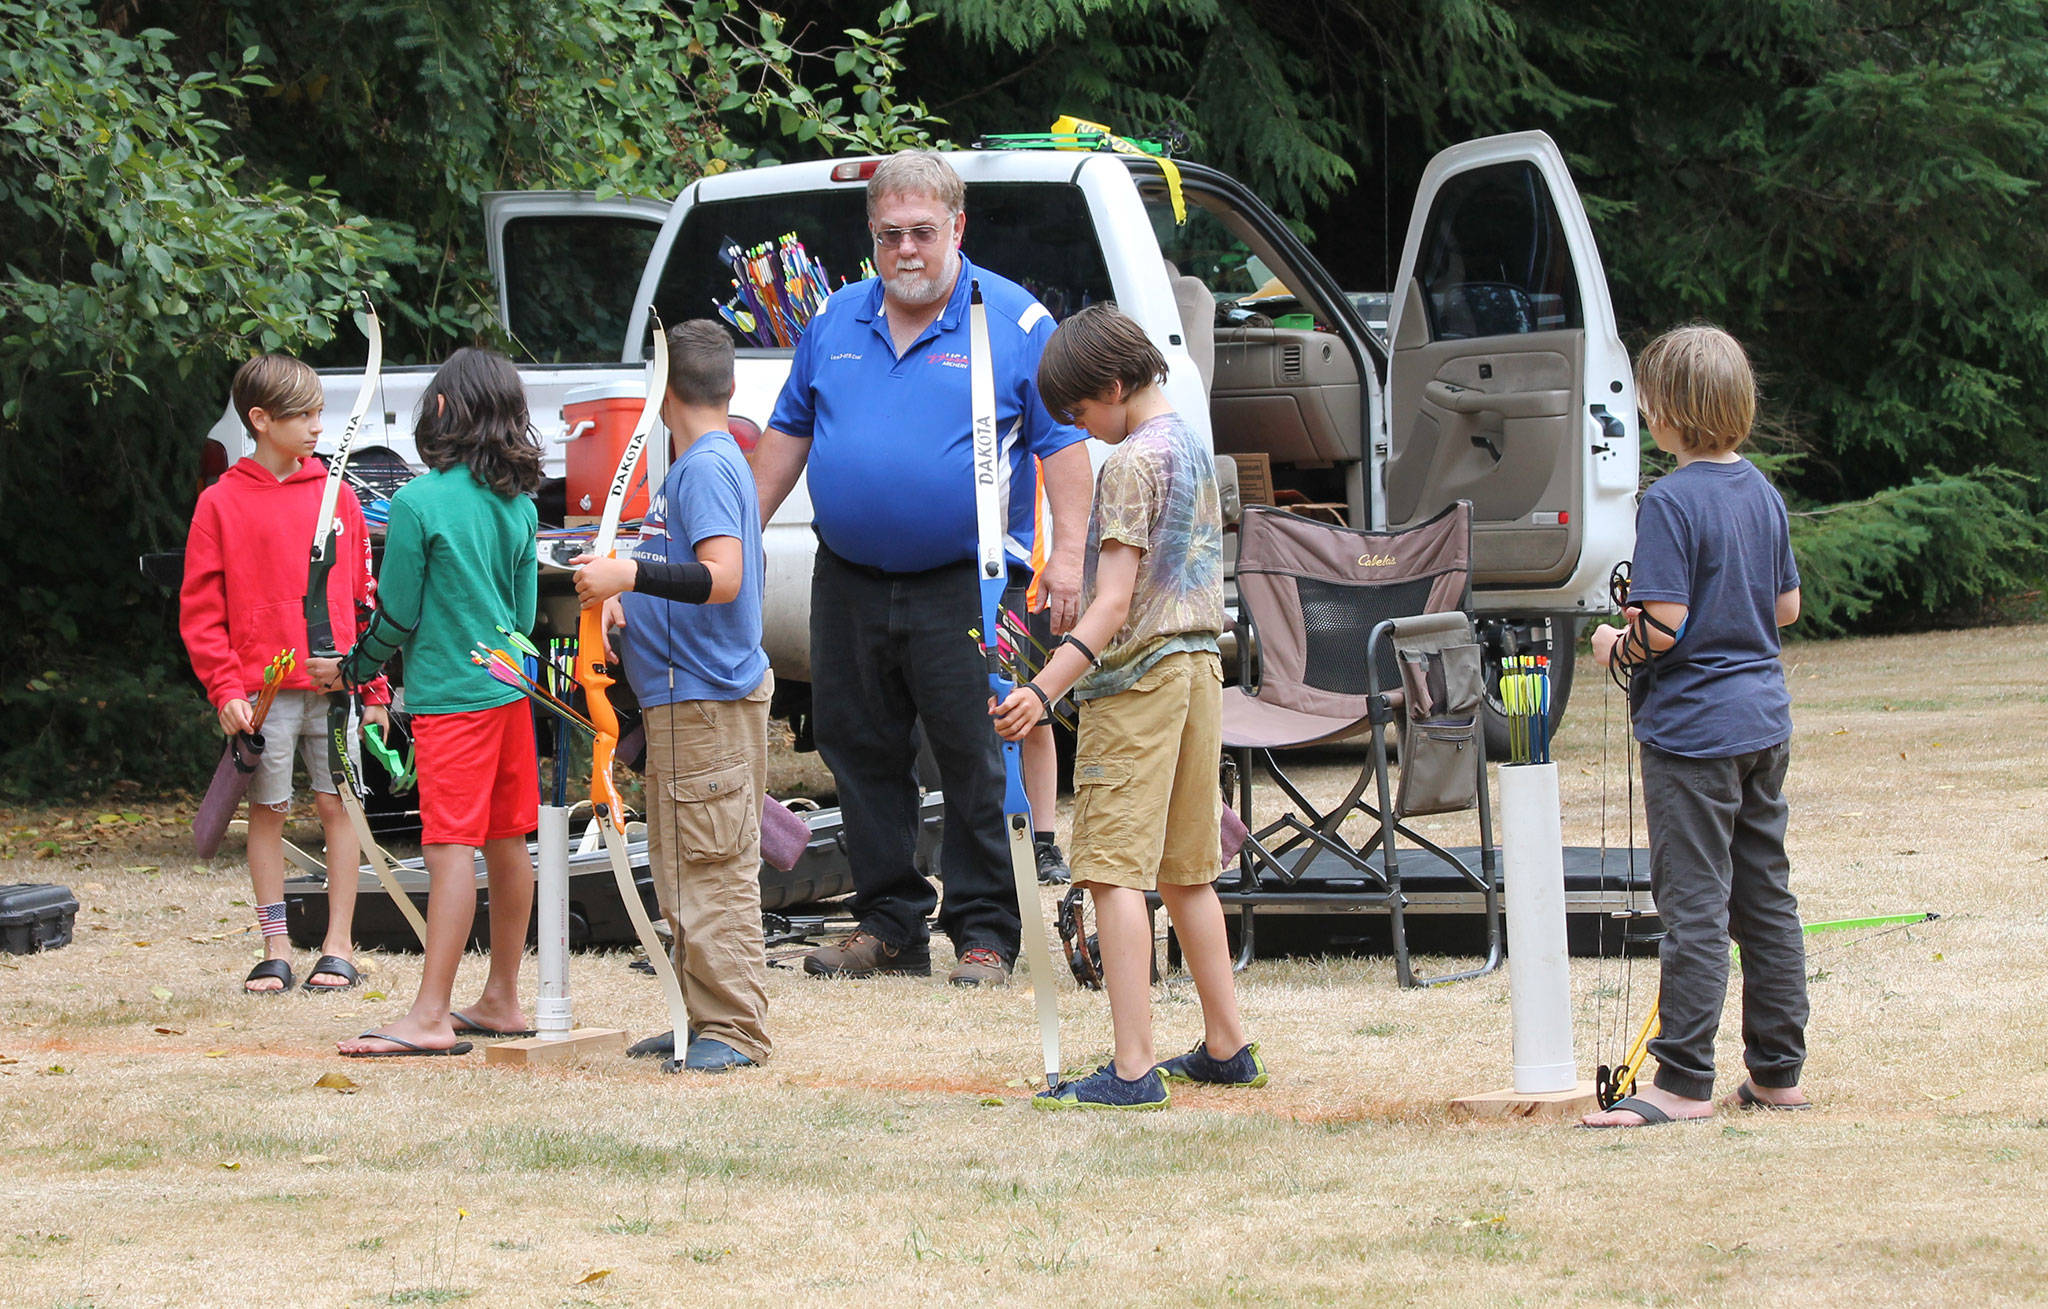 Bill Stinson instructs the group as they begin archery camp last Thursday.(Photo by Jim Waller/South Whidbey Record)